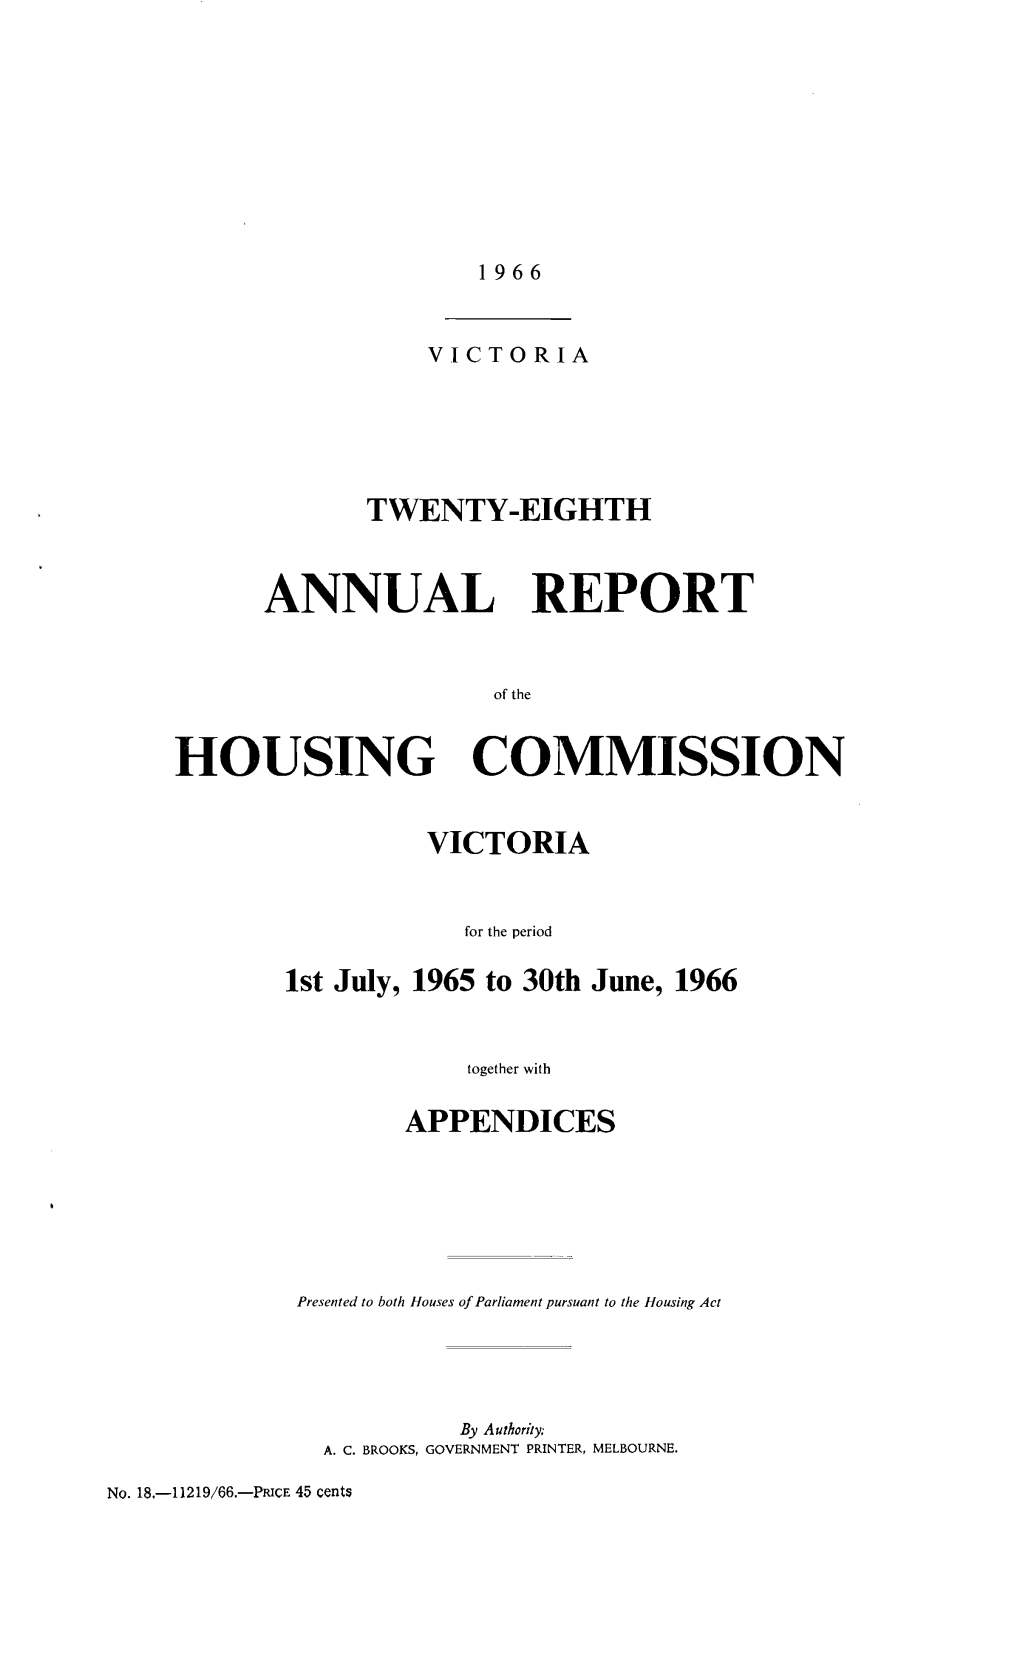 Annual Report Housing Commission